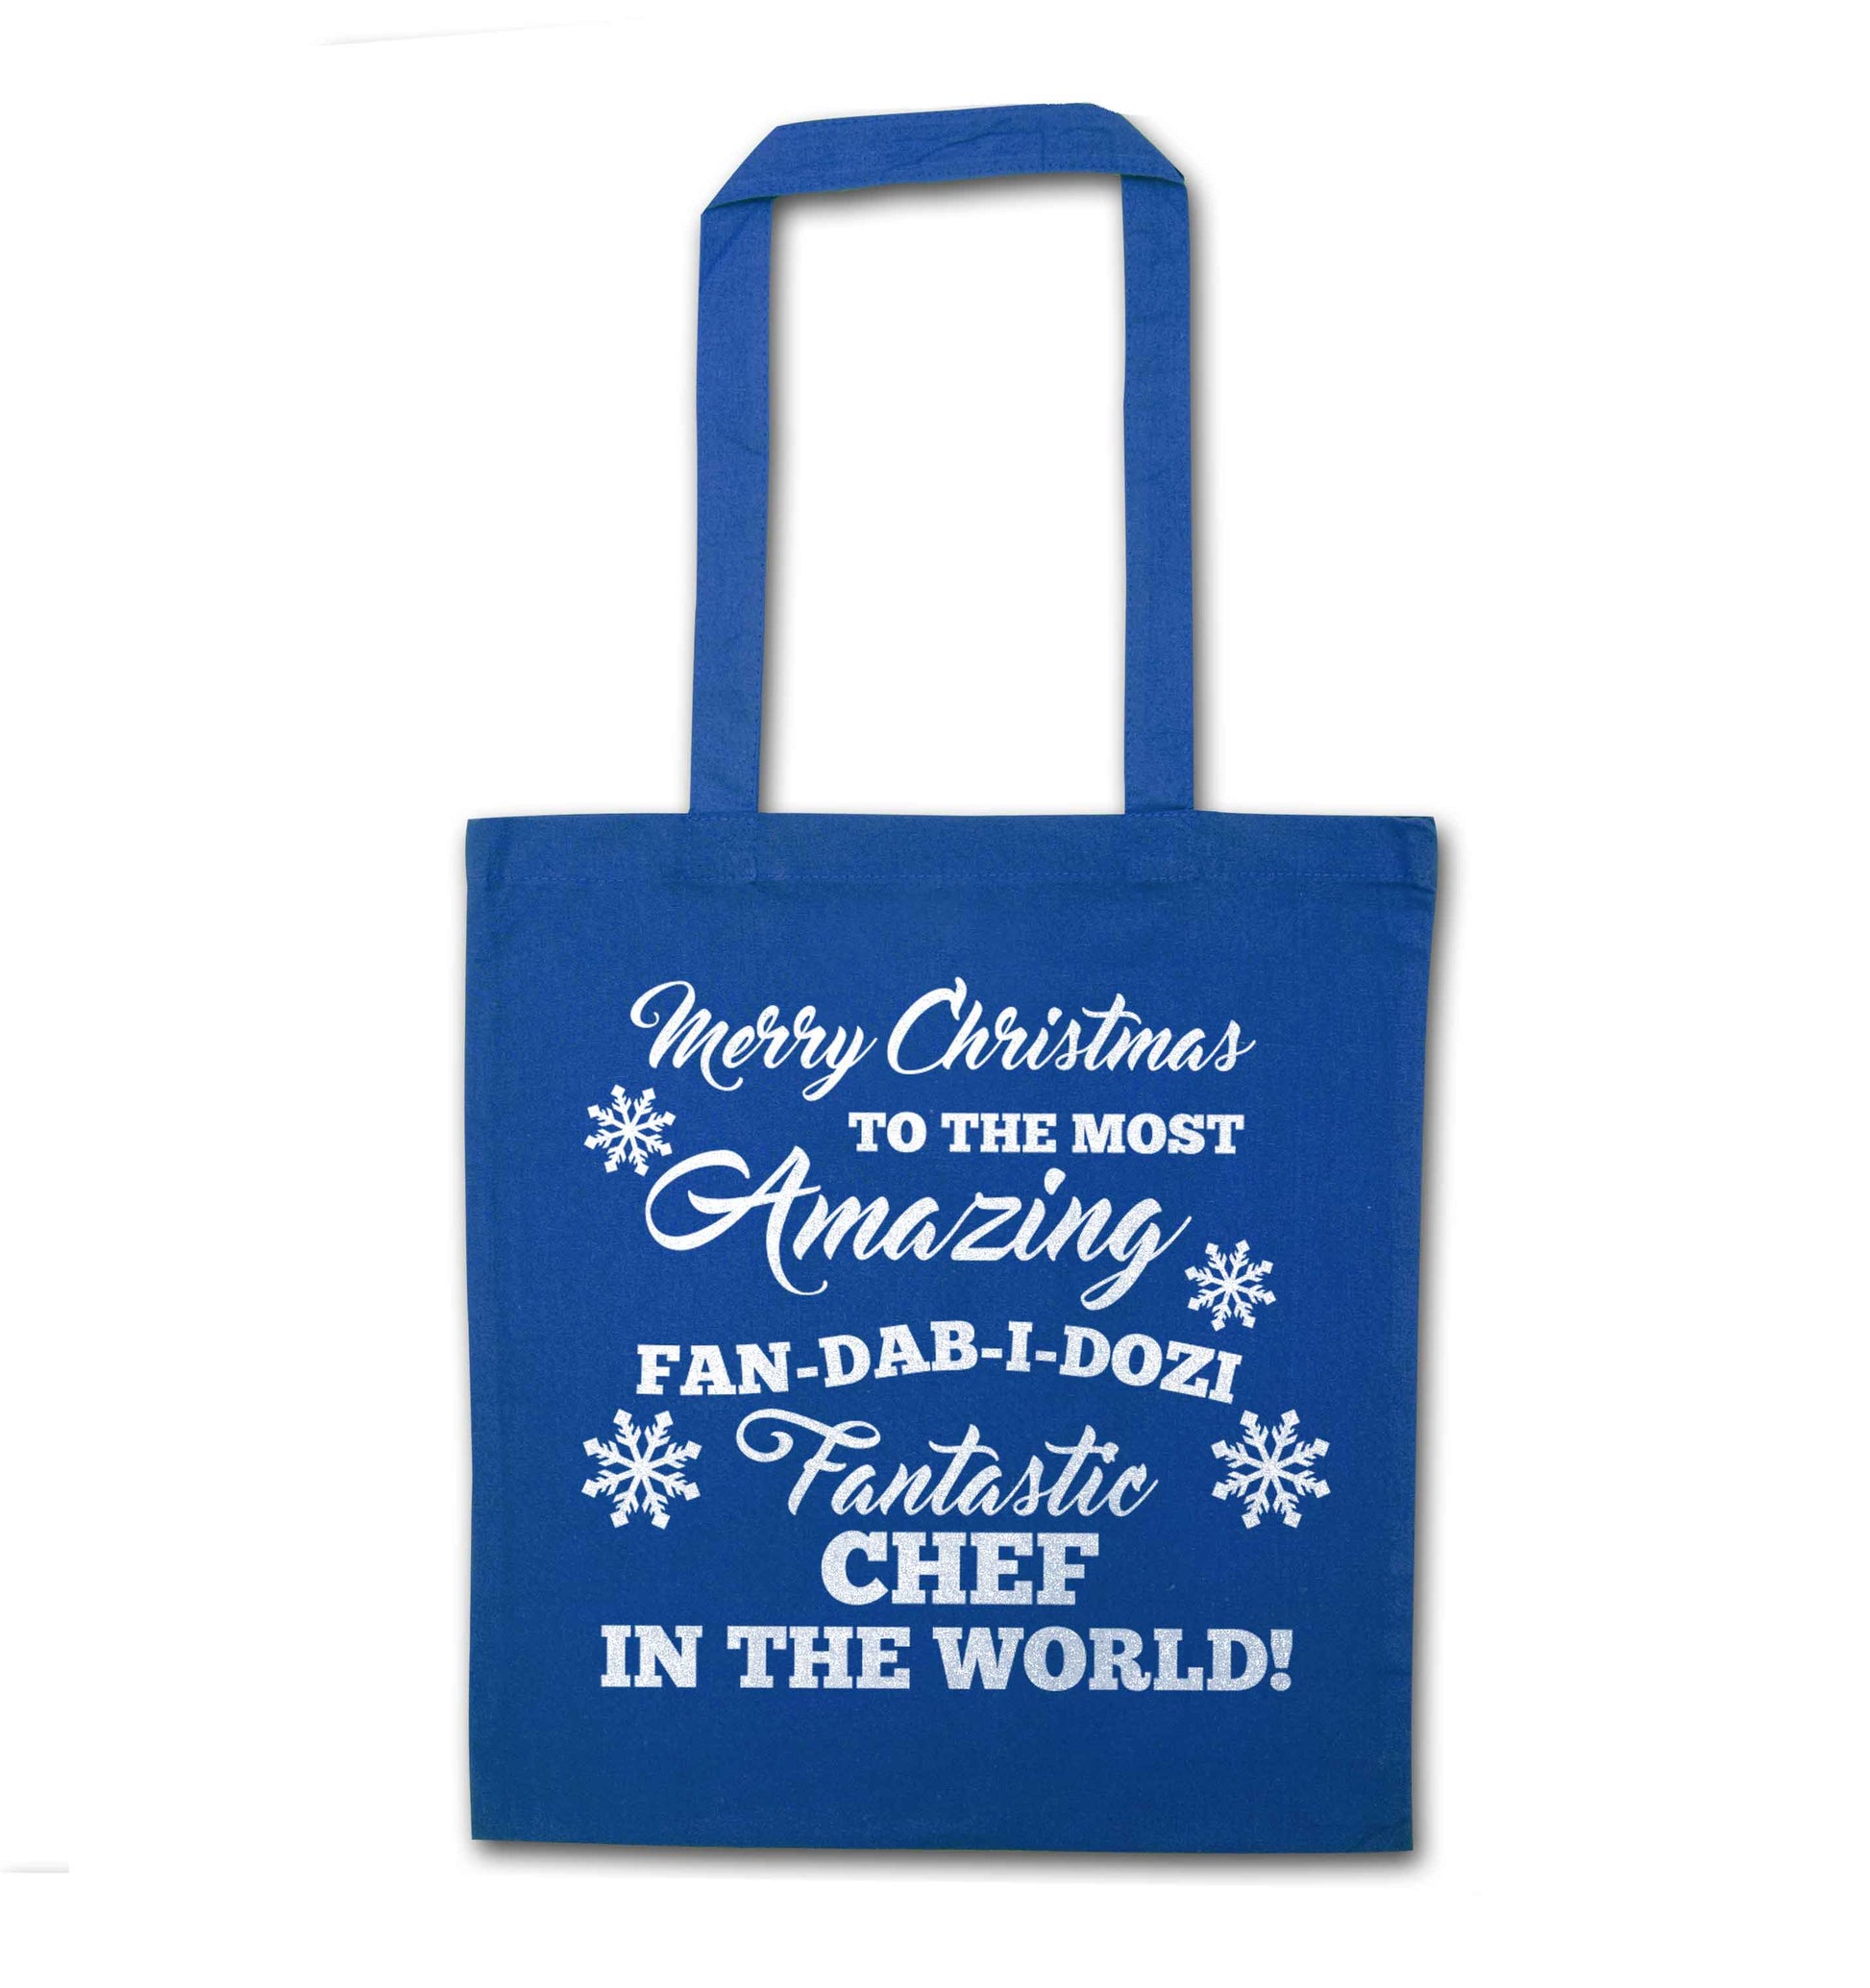 Merry Christmas to the most amazing fan-dab-i-dozi fantasic chef in the world blue tote bag